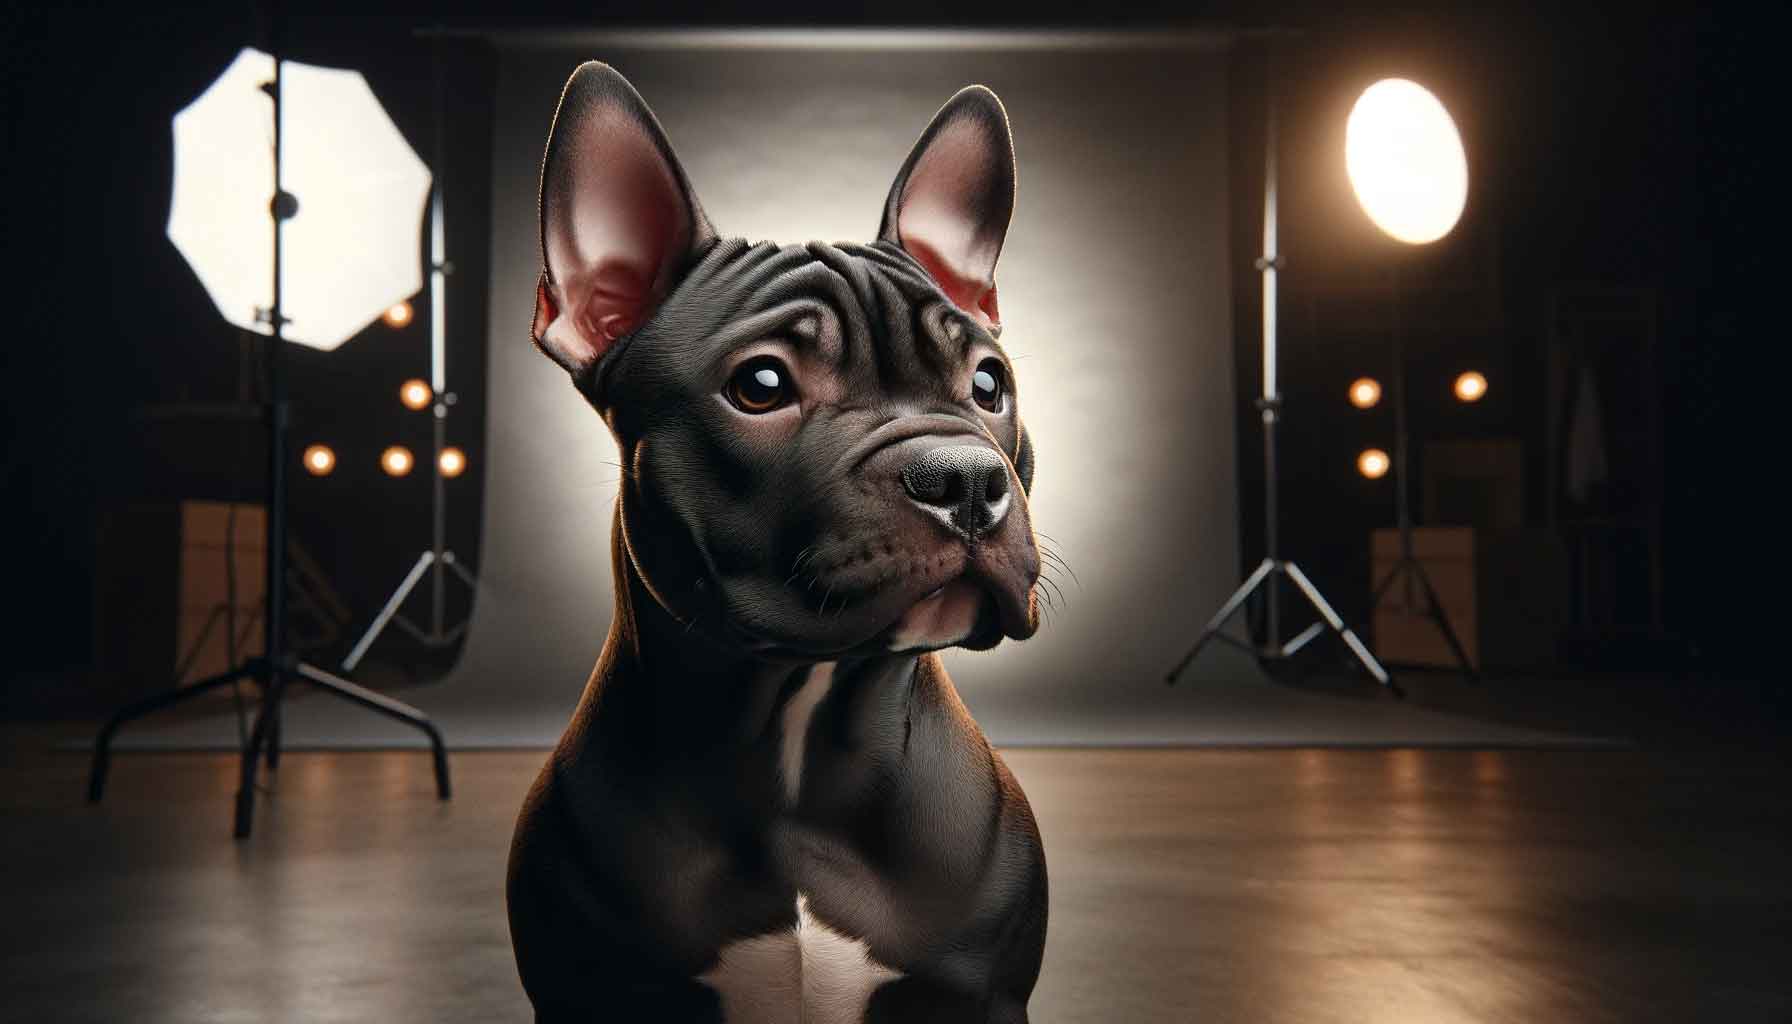 A photograph of a micro bully with cropped ears, sitting in a professional studio setting. The cropped ears lend the dog a sharp, attentive appearance, further enhanced by the studio's sophisticated lighting.